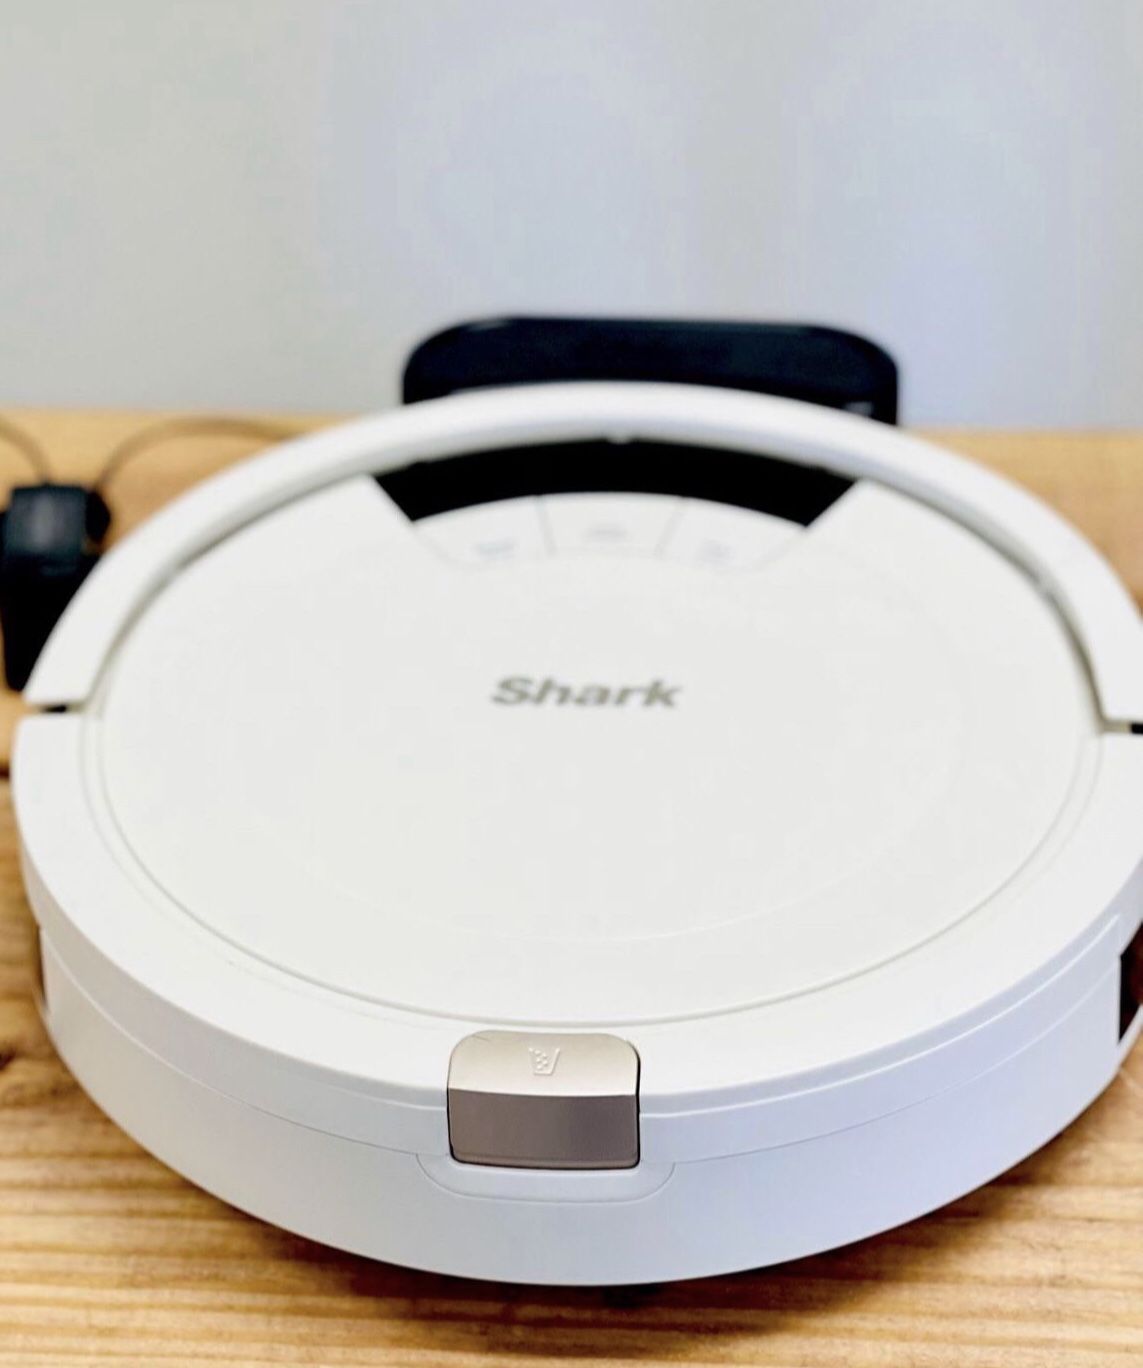 Shark AV752 ION Robot Vacuum, with Tri-Brush System, Wi-Fi Connected, 120min Runtime, Works with Alexa